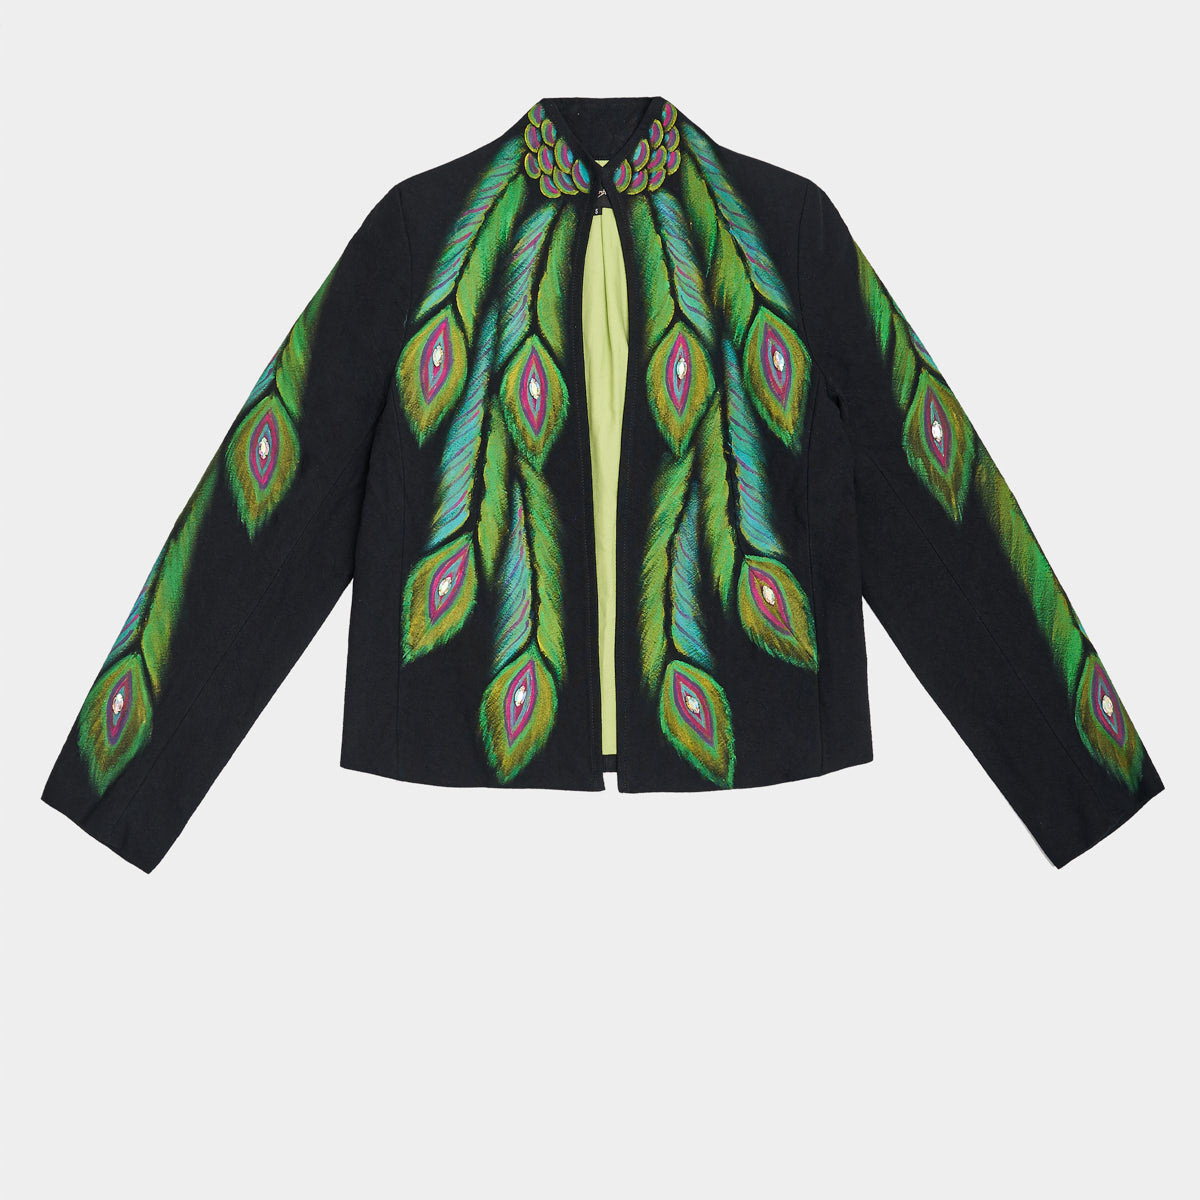 HAND-PAINTED AND HAND-EMBROIDERED JACKET - PAVO REAL